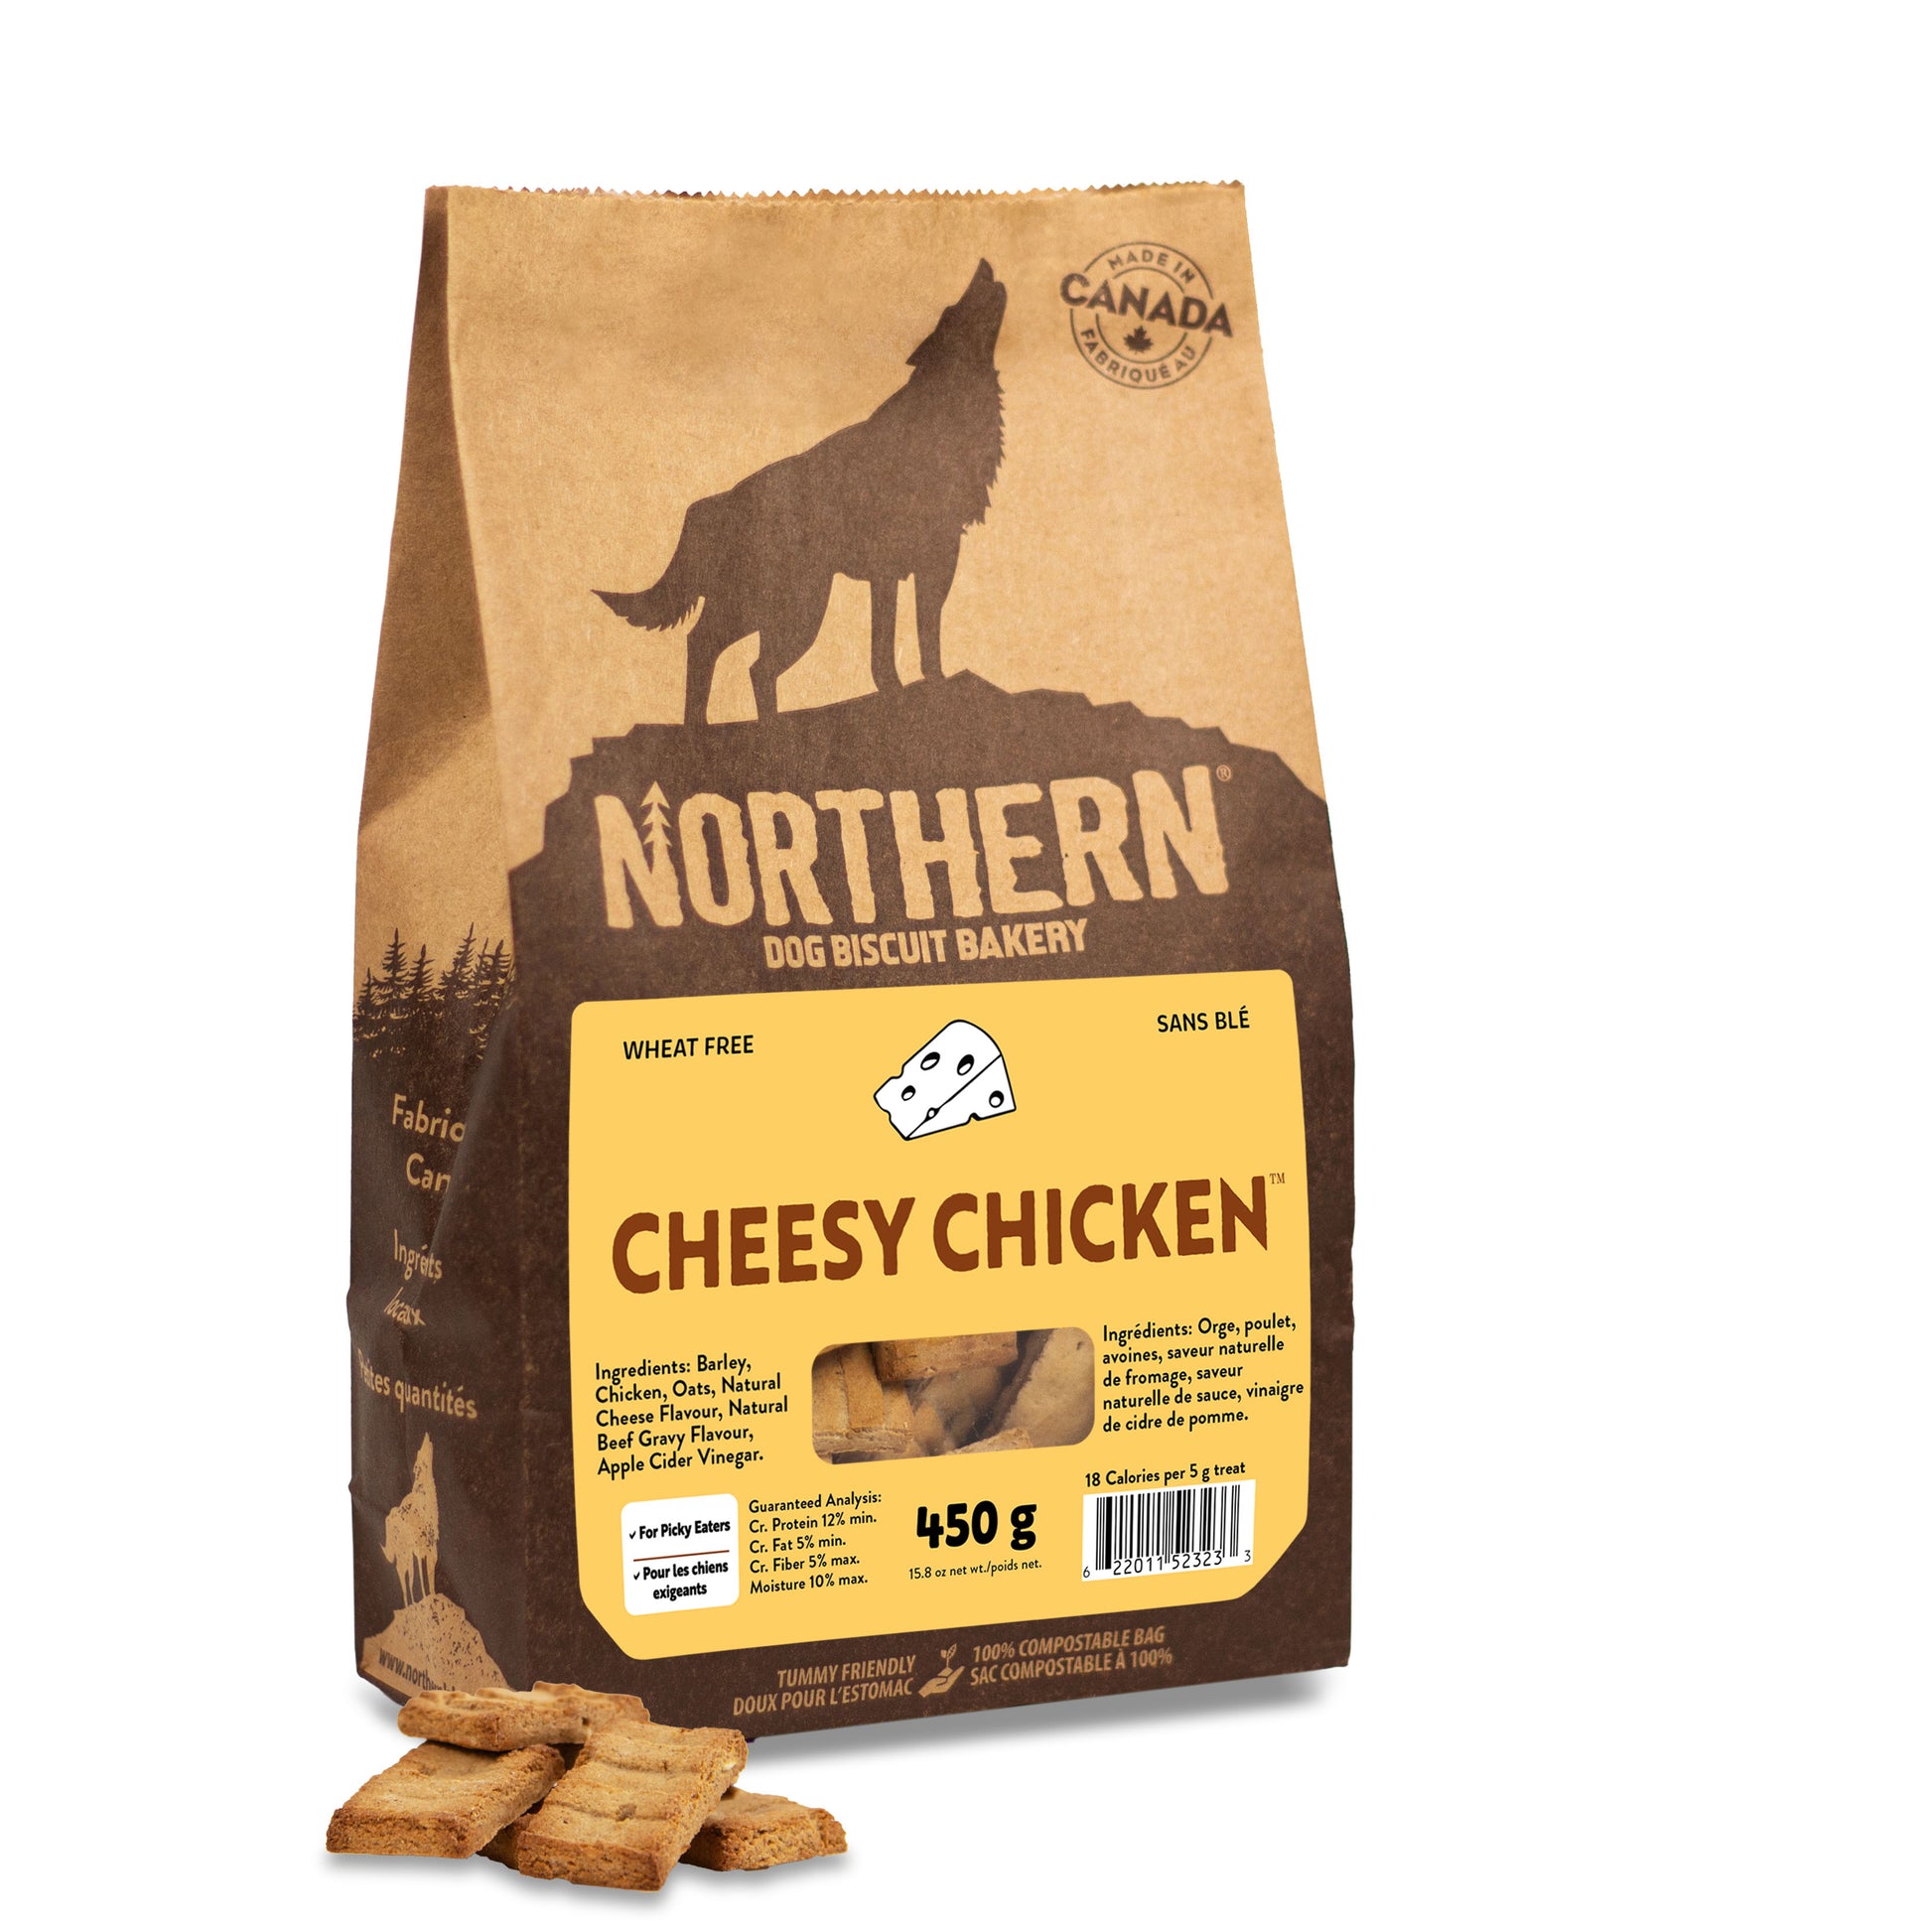 Cheesy Chicken dog biscuit-yellow label-product photo with left view